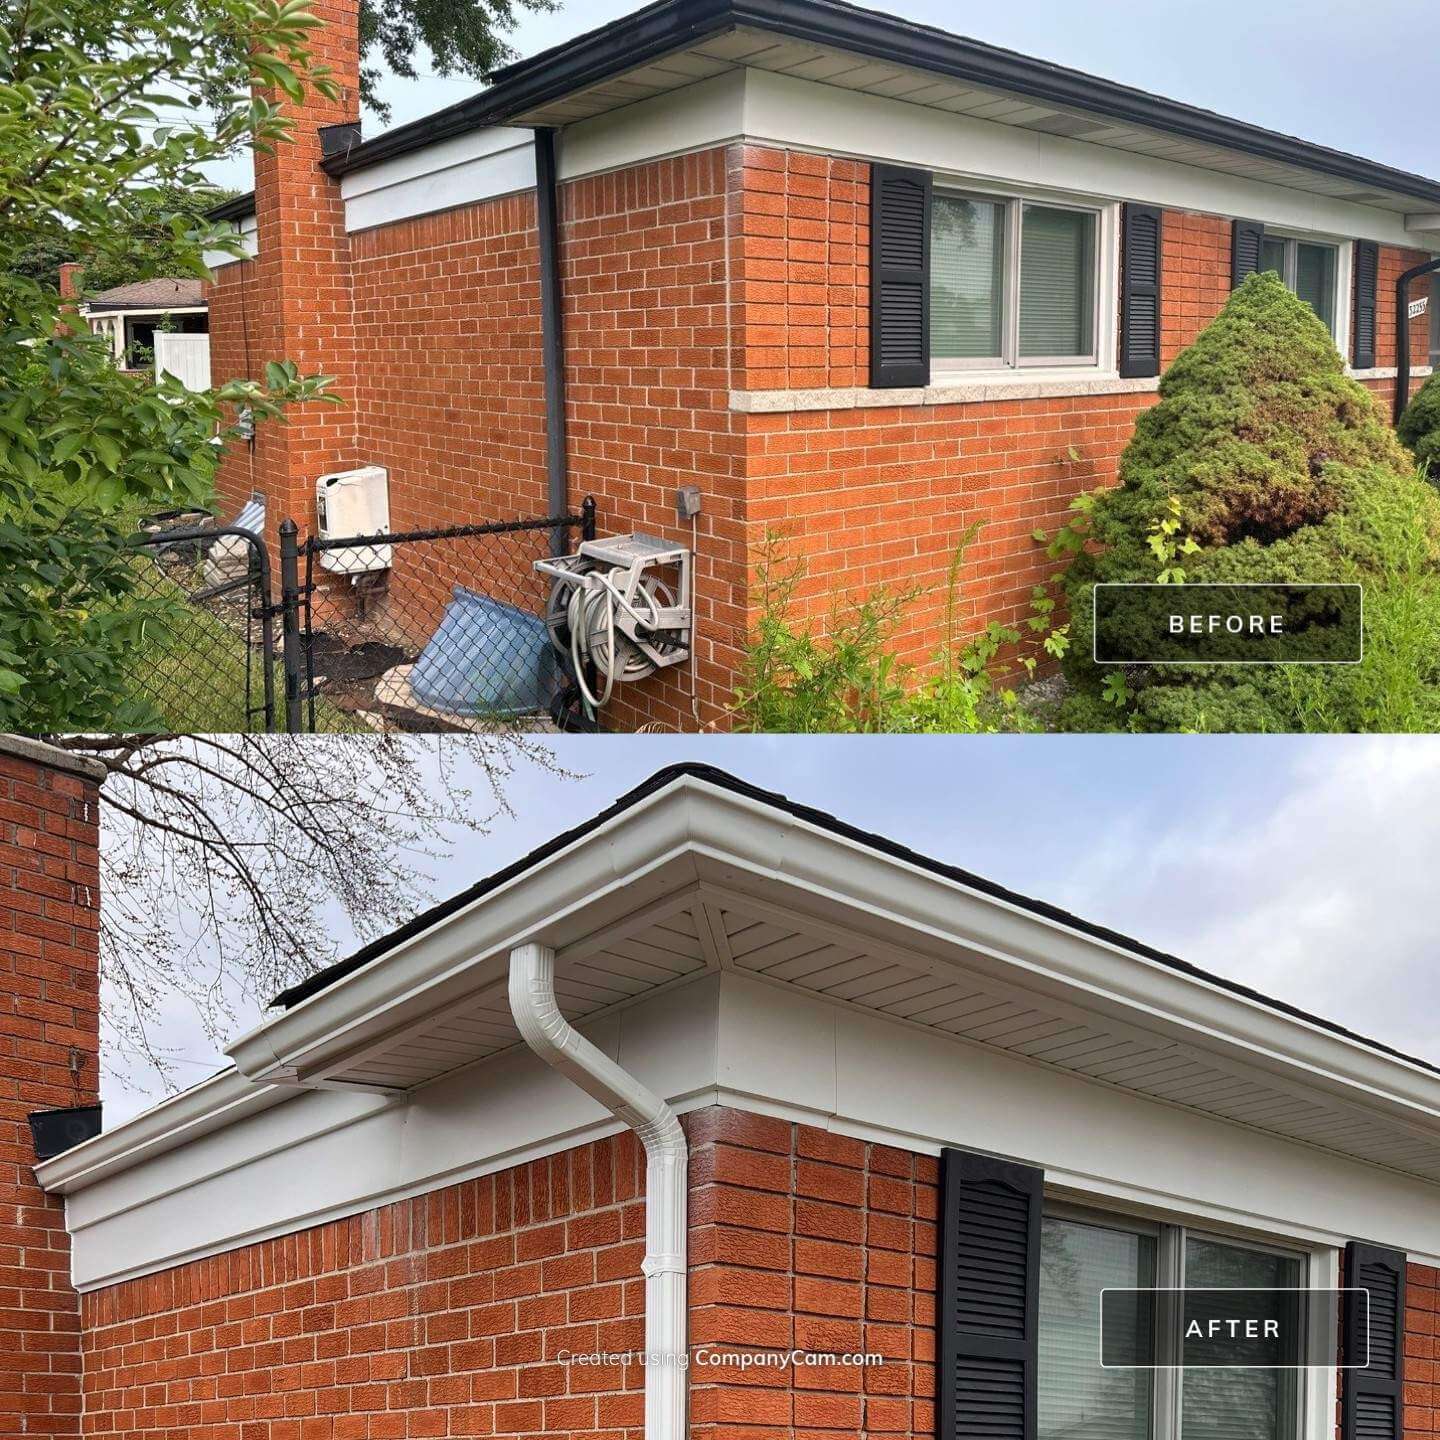 Before and after of a home with new gutters